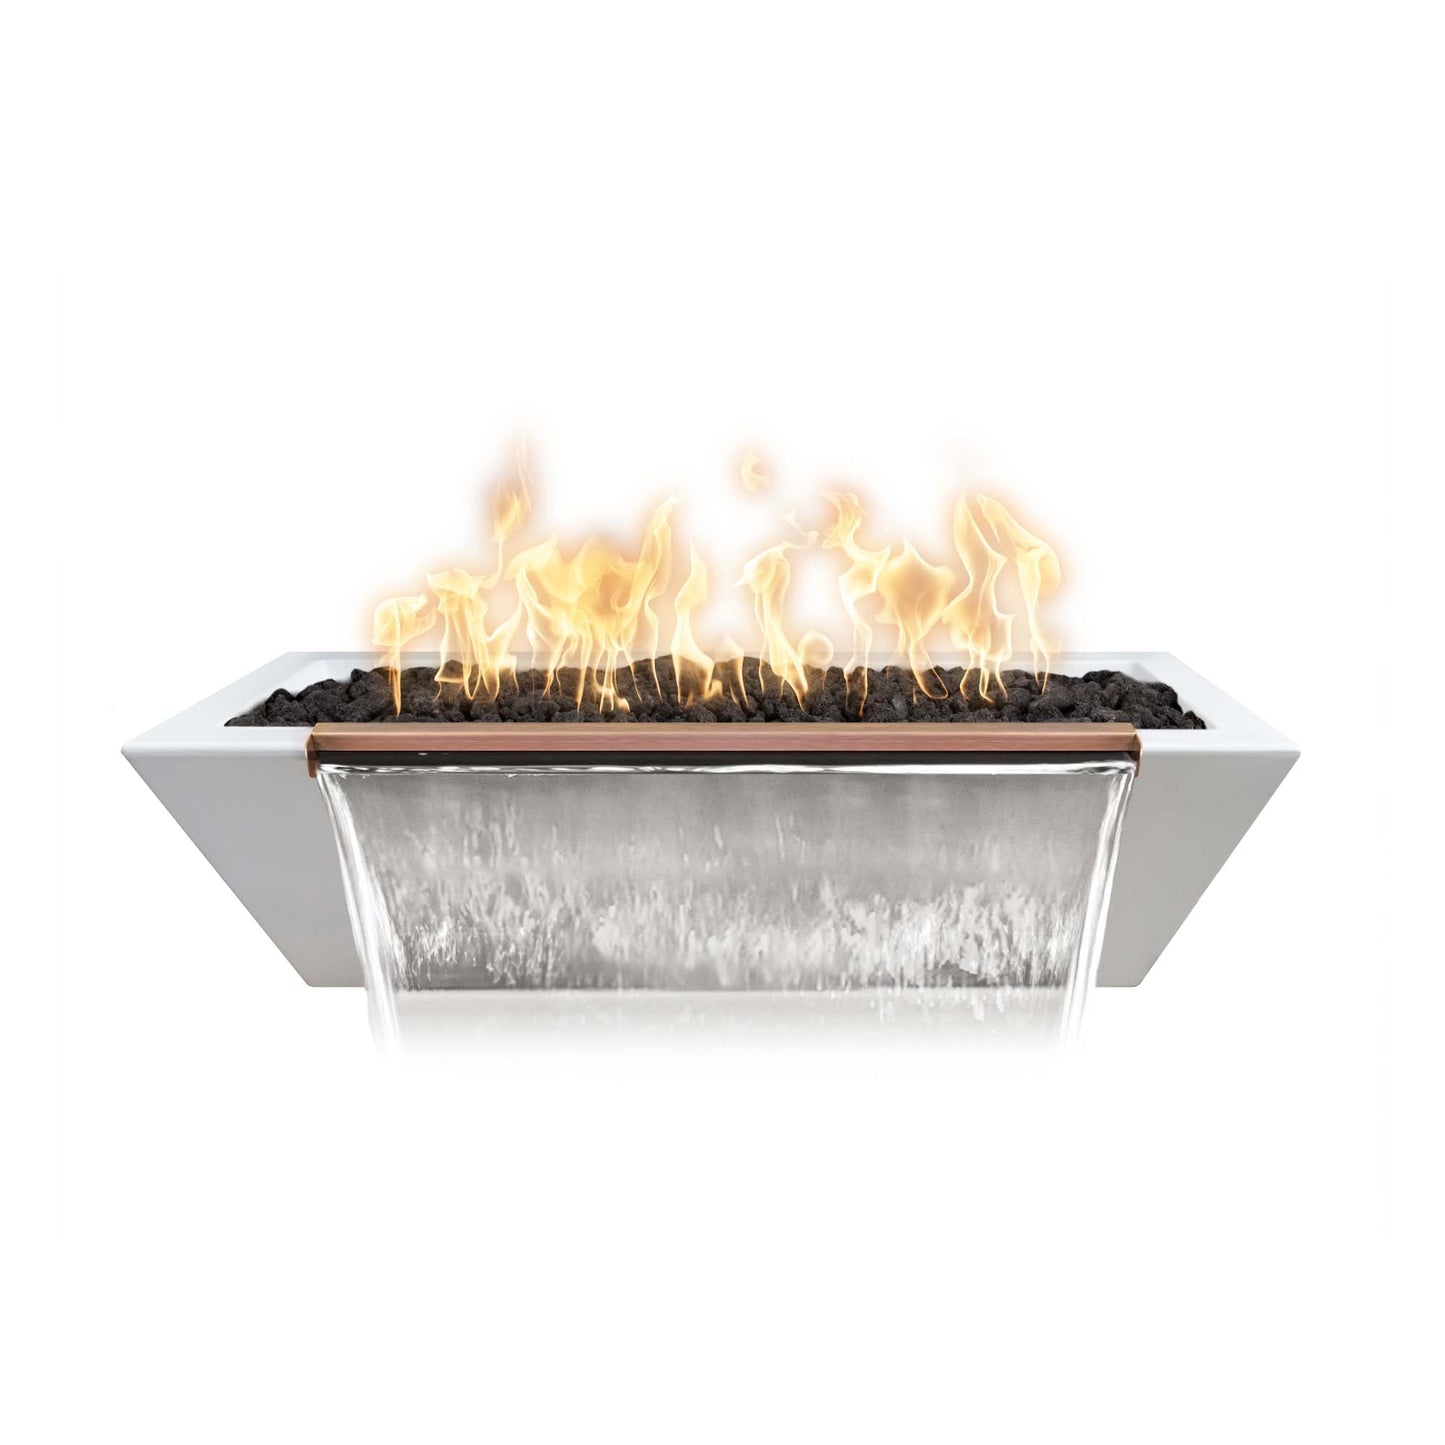 The Outdoor Plus Linear Maya 72" White GFRC Concrete Natural Gas Fire & Water Bowl with 12V Electronic Ignition